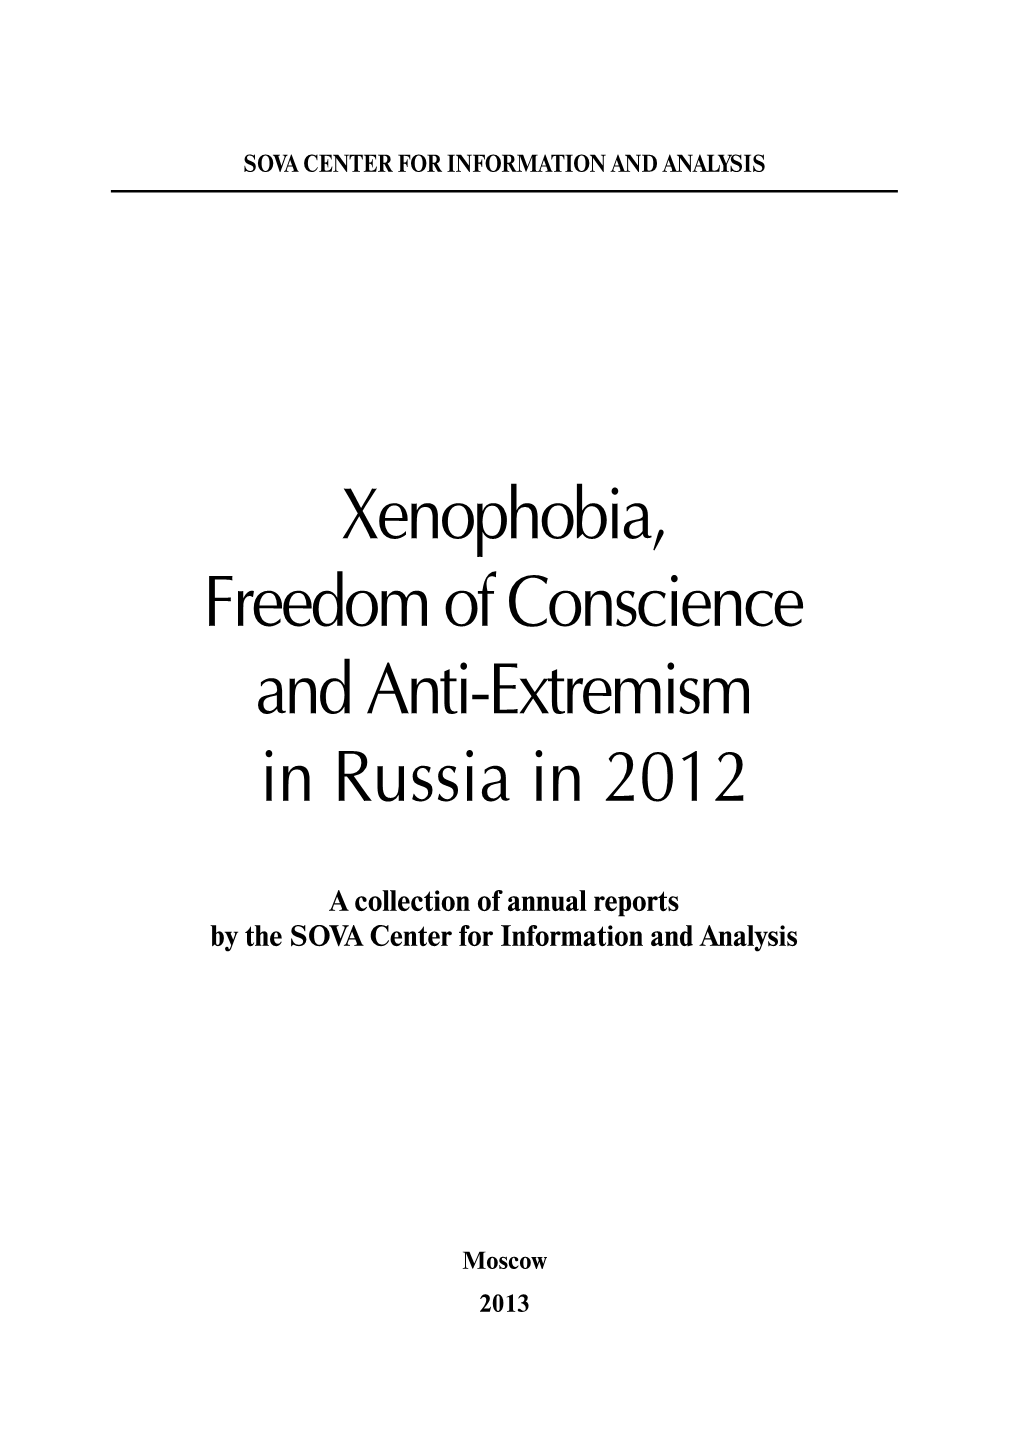 Xenophobia, Freedom of Conscience and Anti-Extremism in Russia in 2012